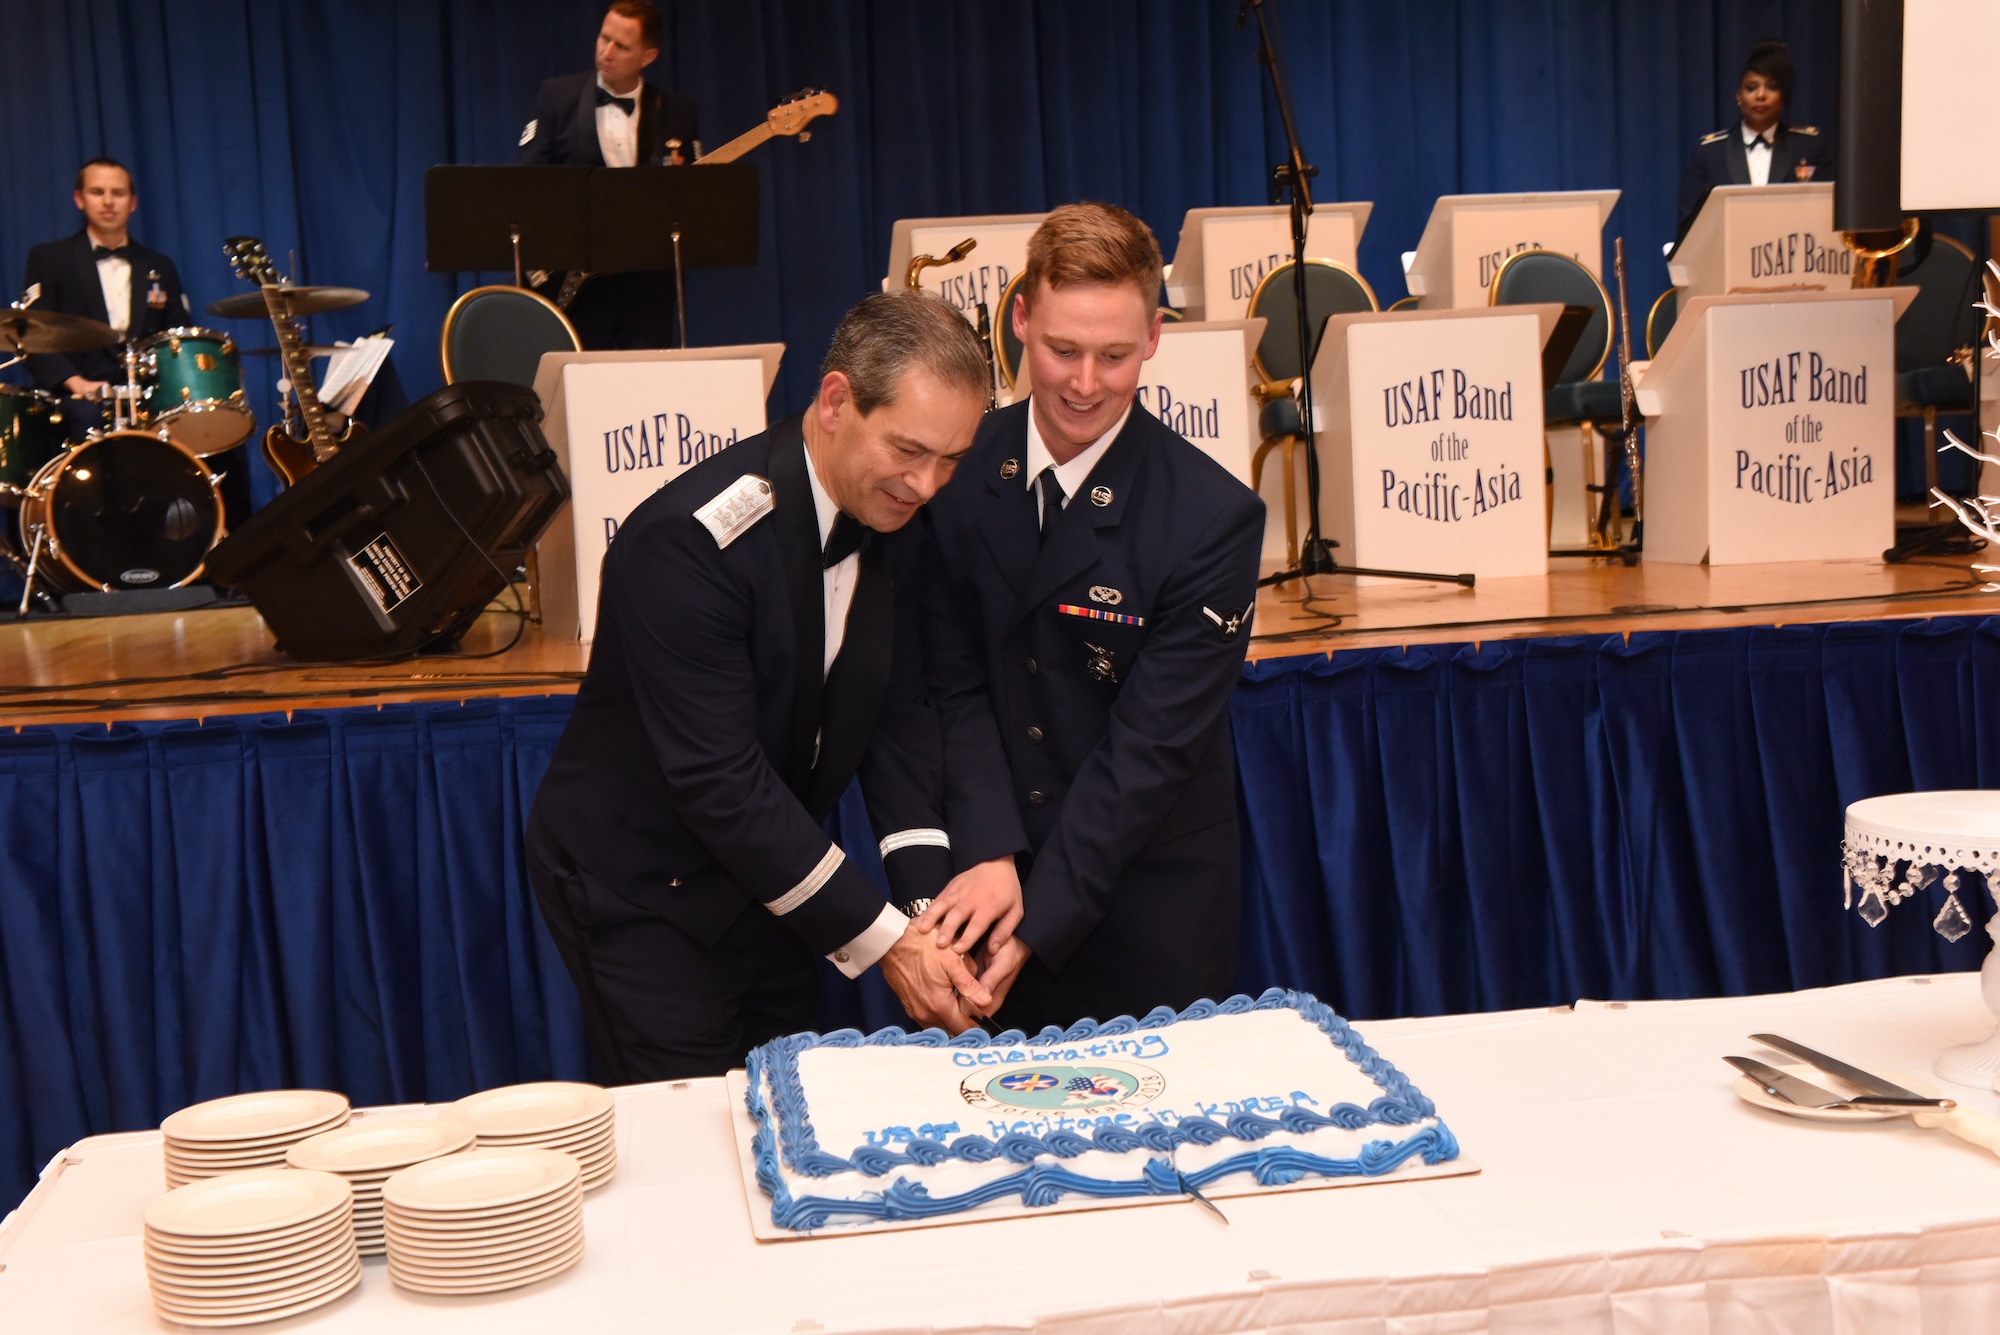 U.S. Air Force Lt. Gen. Kenneth S. Wilsbach, Seventh Air Force commander, and U.S. Air Force Airman Marcus Davidson, assigned to the 51st Civil Engineer Squadron fire and emergency services flight, use a ceremonial sword to cut the cake during an Air Force 71st Birthday Ball at Osan Air Base, Republic of Korea, September 15, 2018.